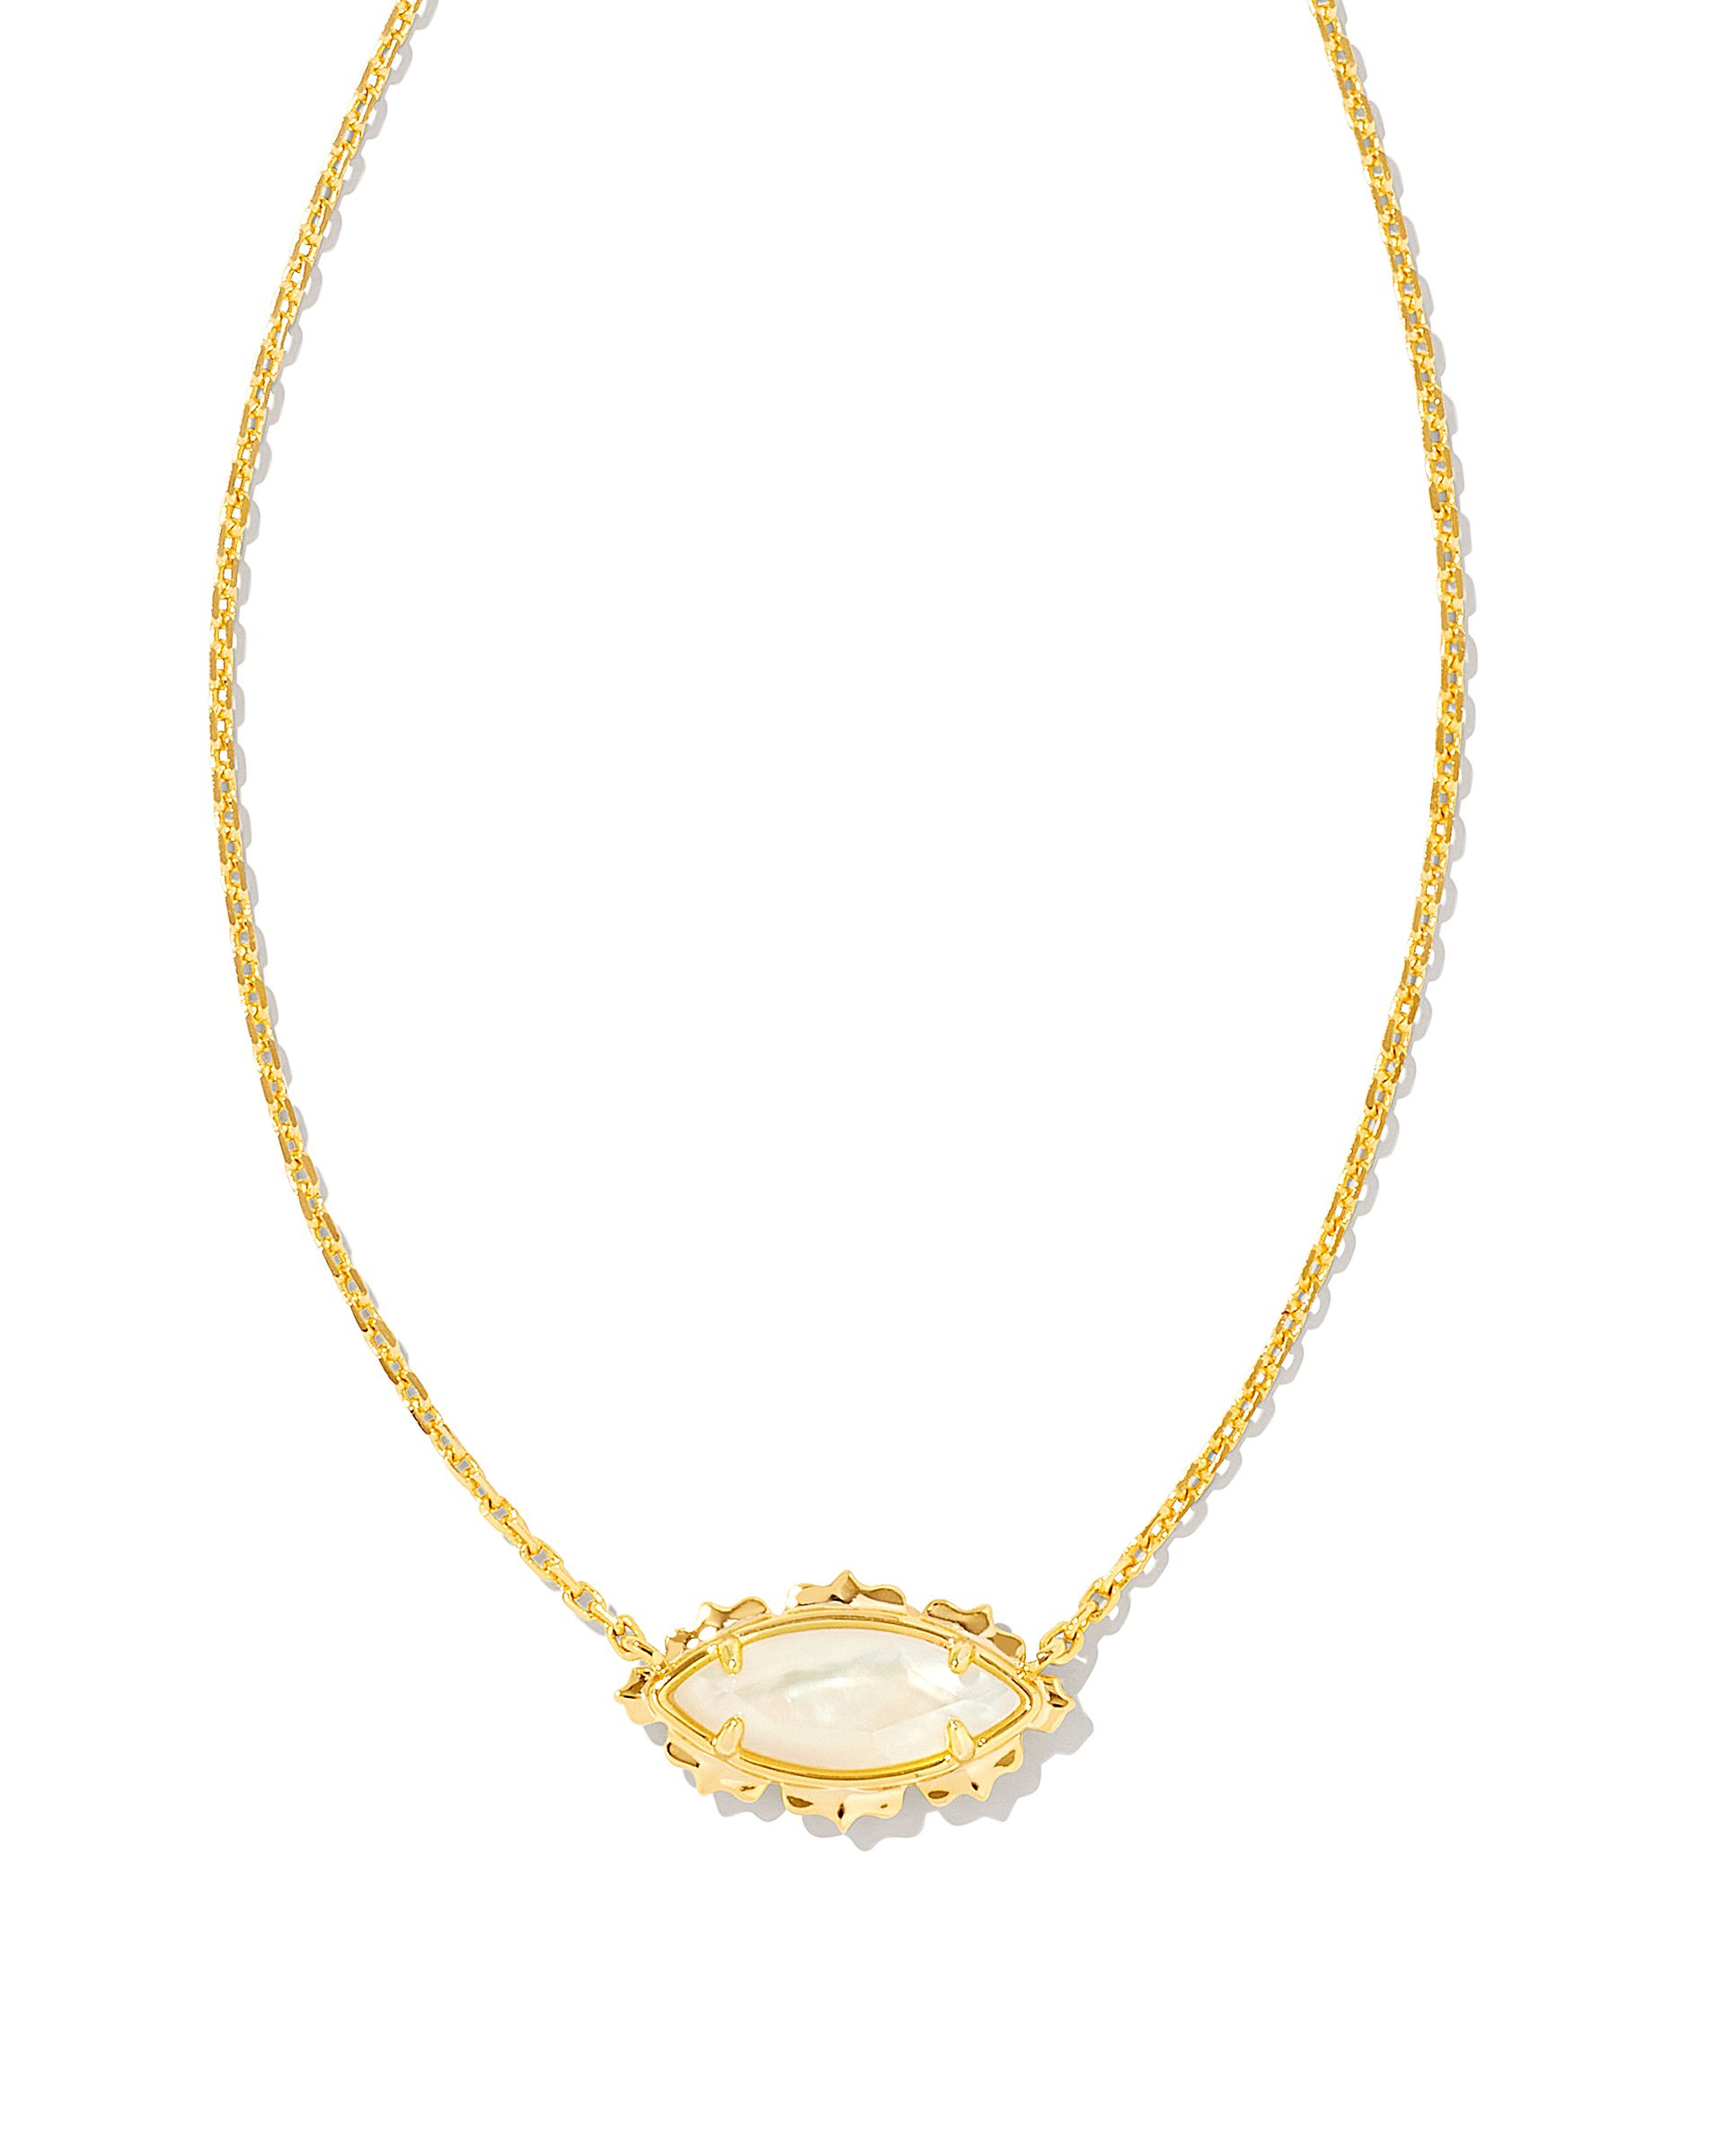 Kendra Scott | Brielle Convertible Medallion Chain Necklace in Gold